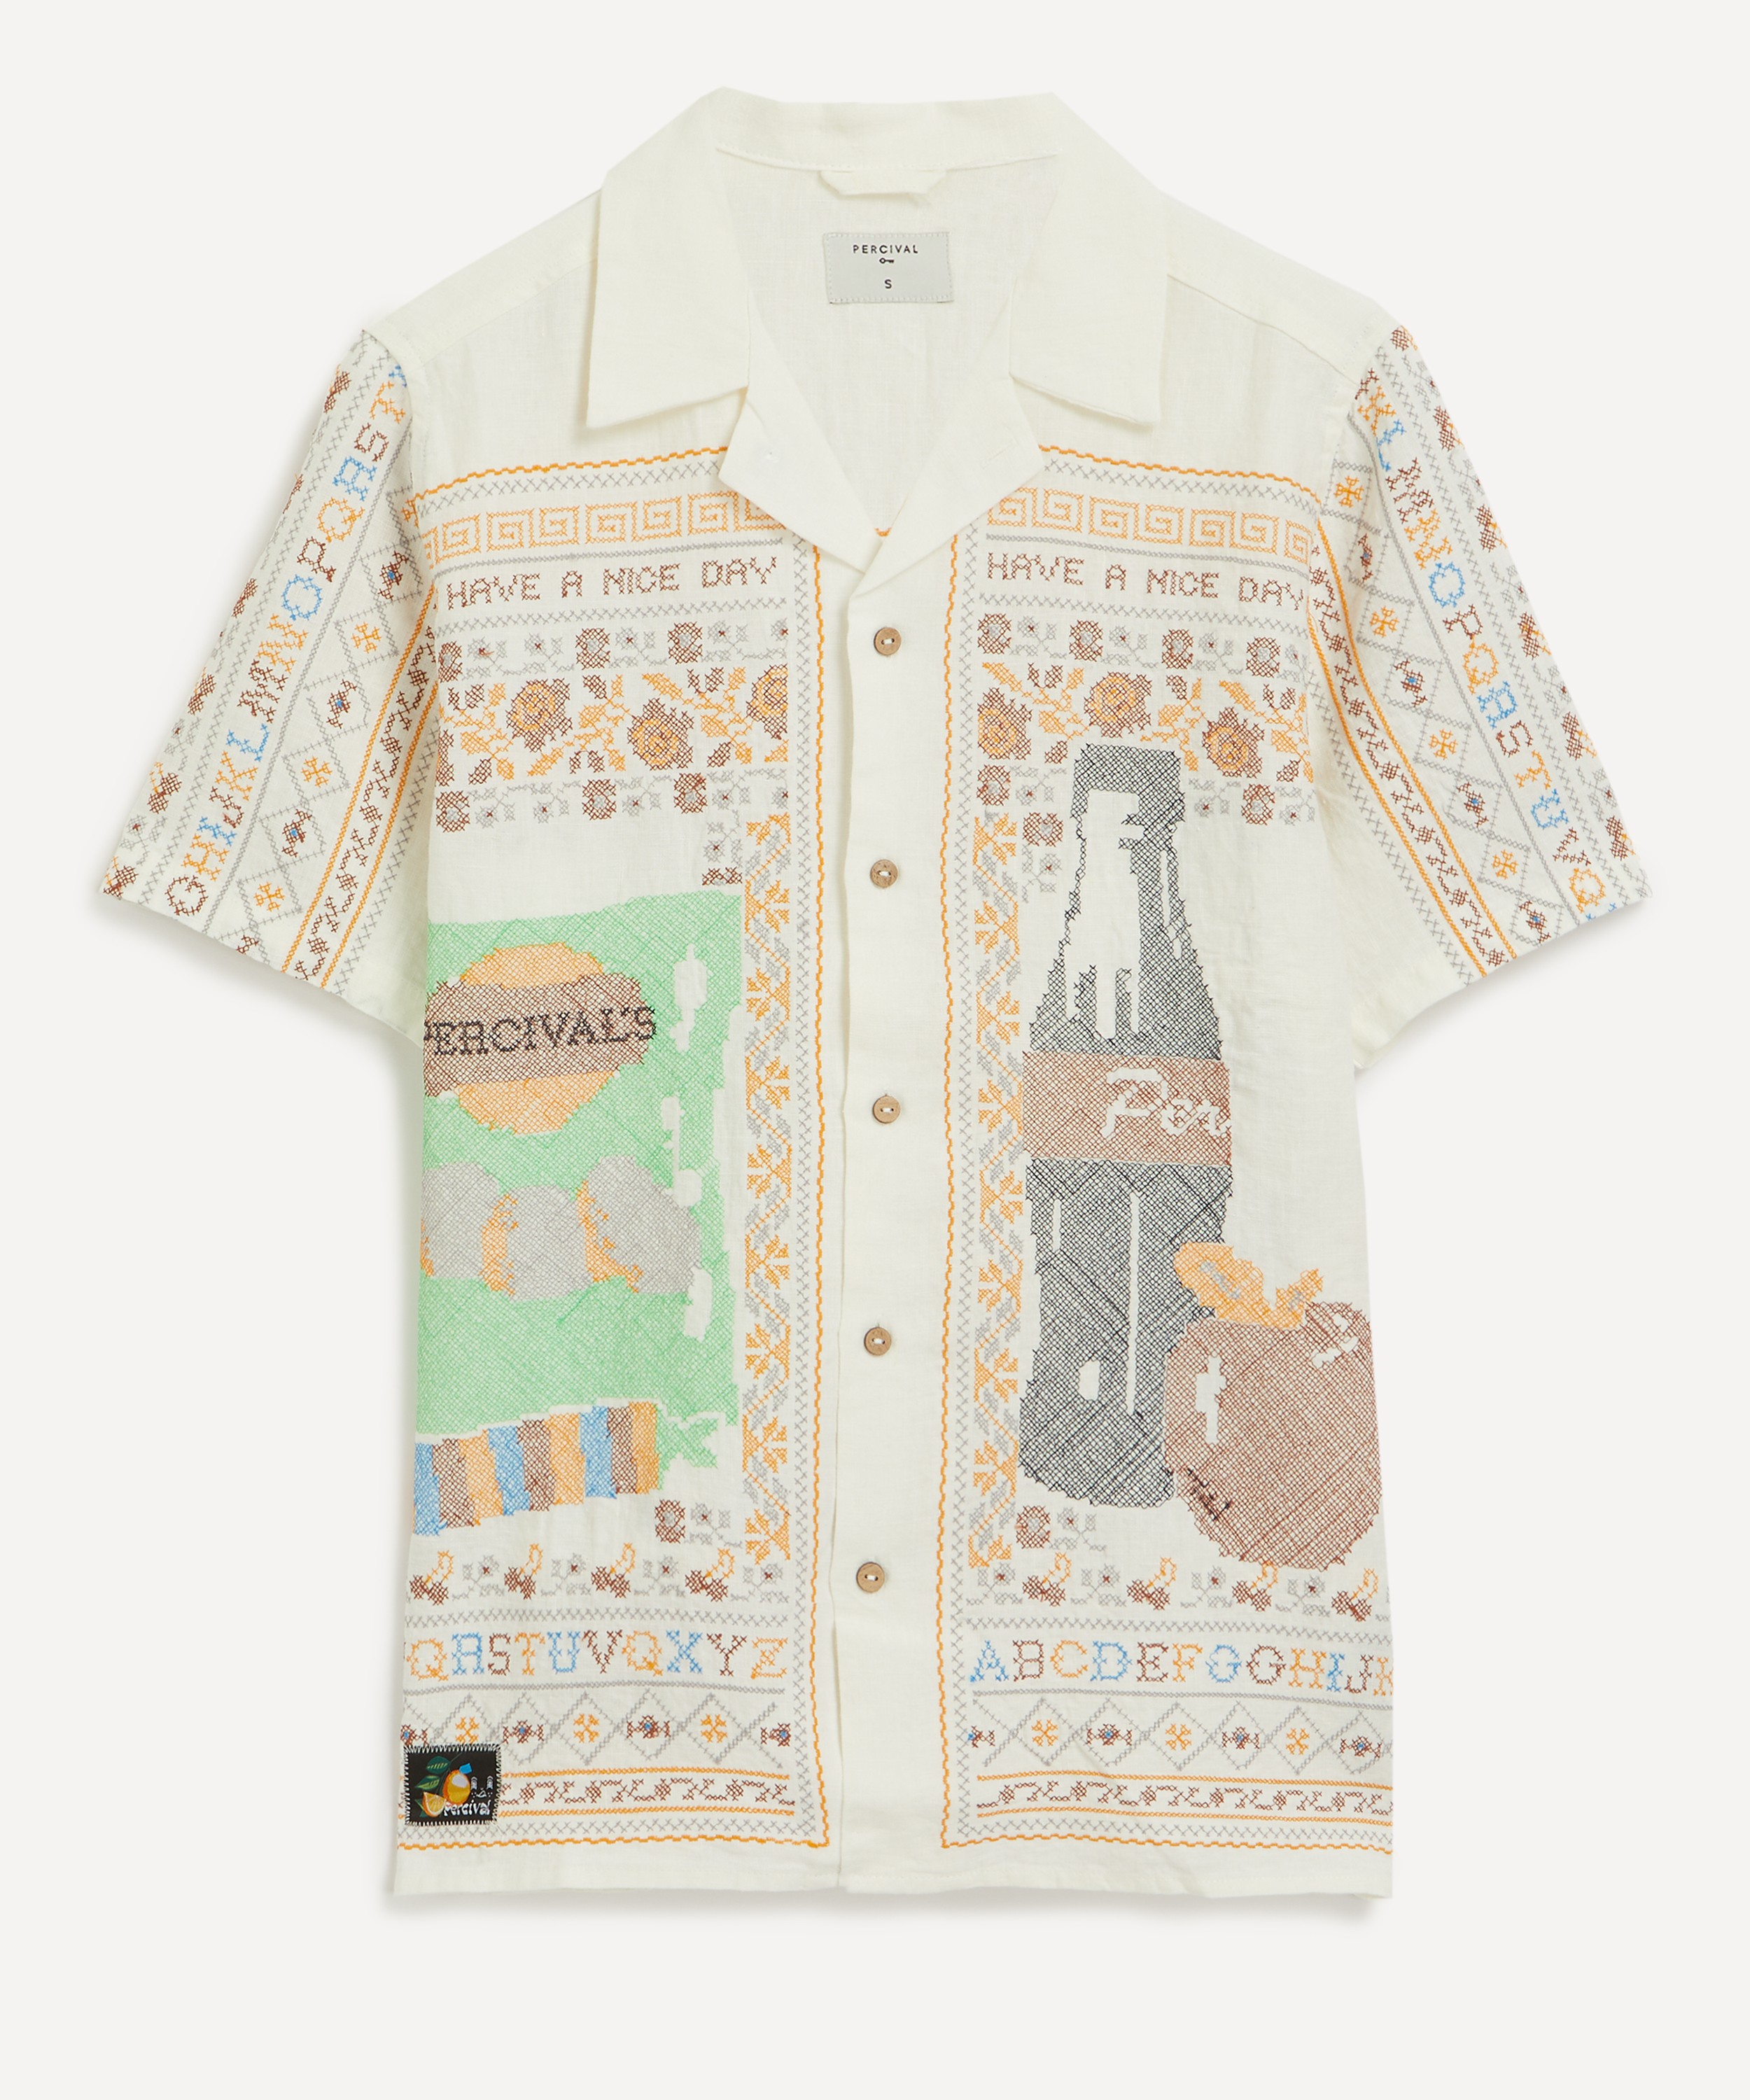 Percival - Meal Deal Tapestry Shirt